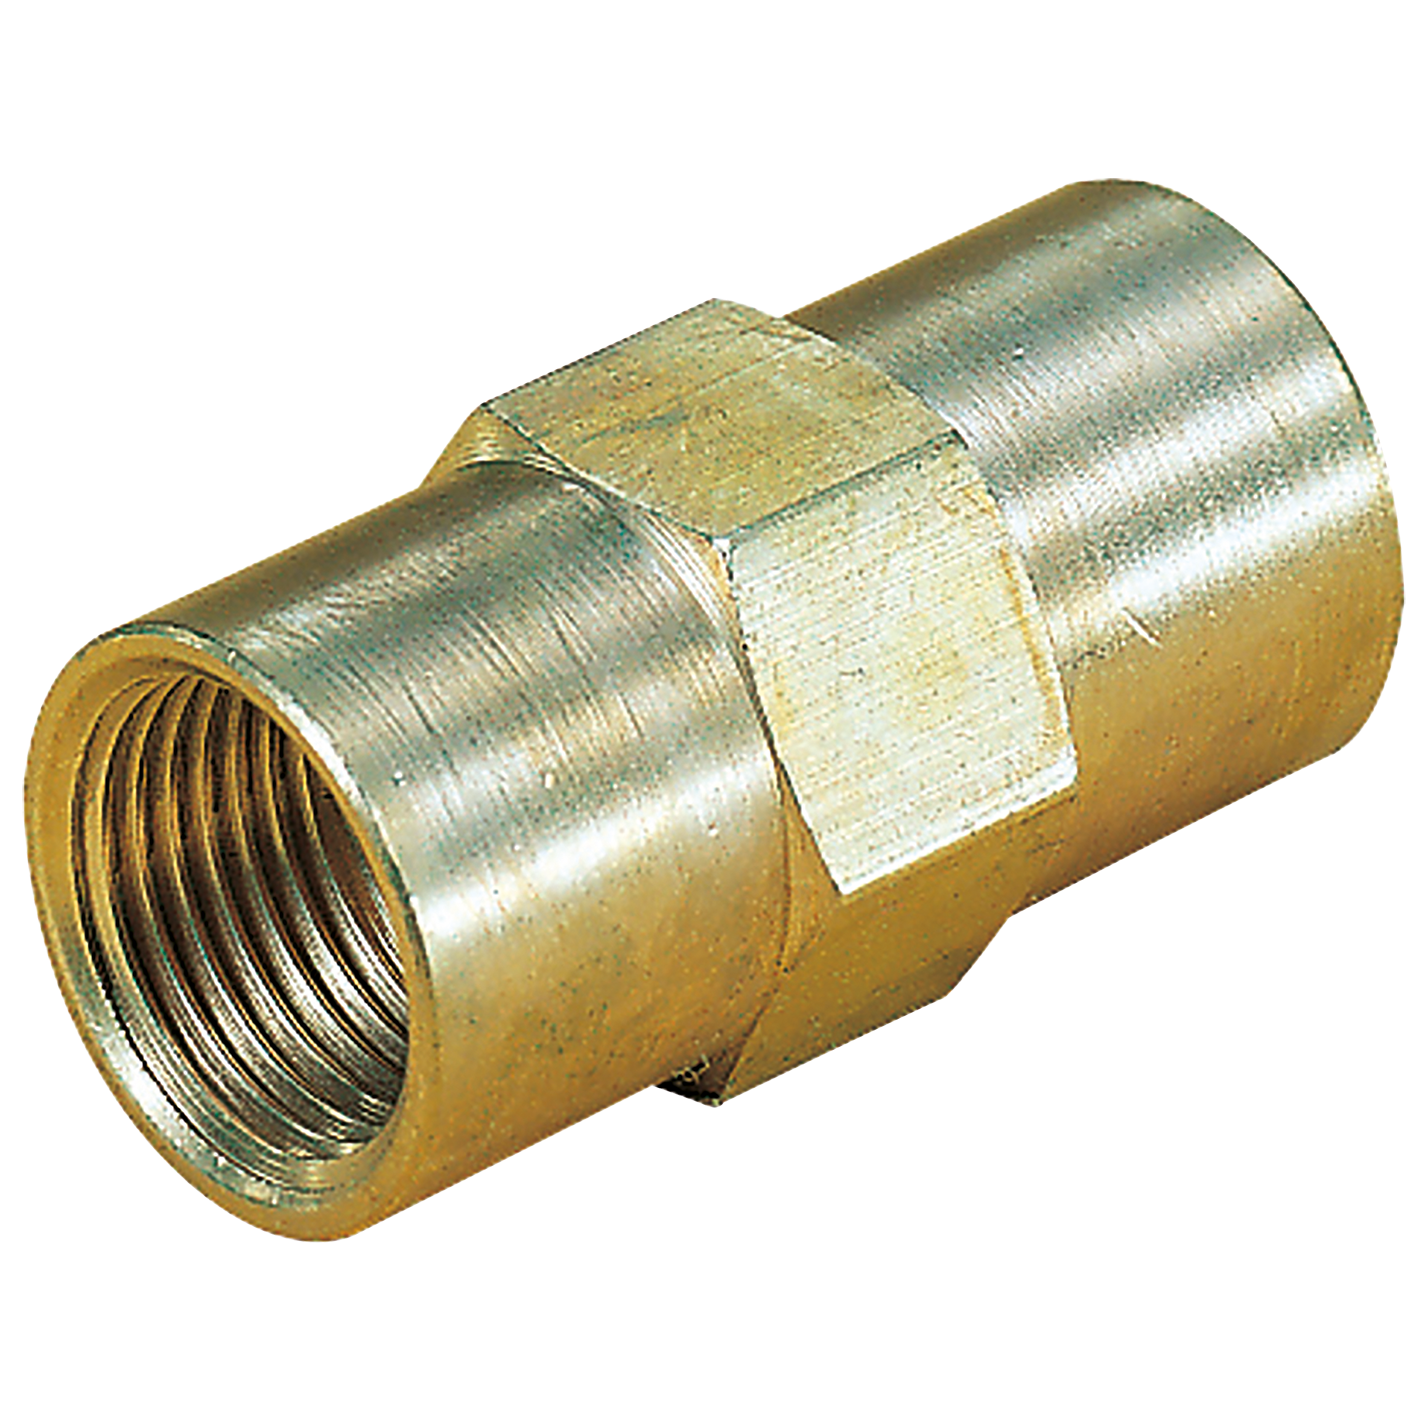 3/8" OD Straight Connector